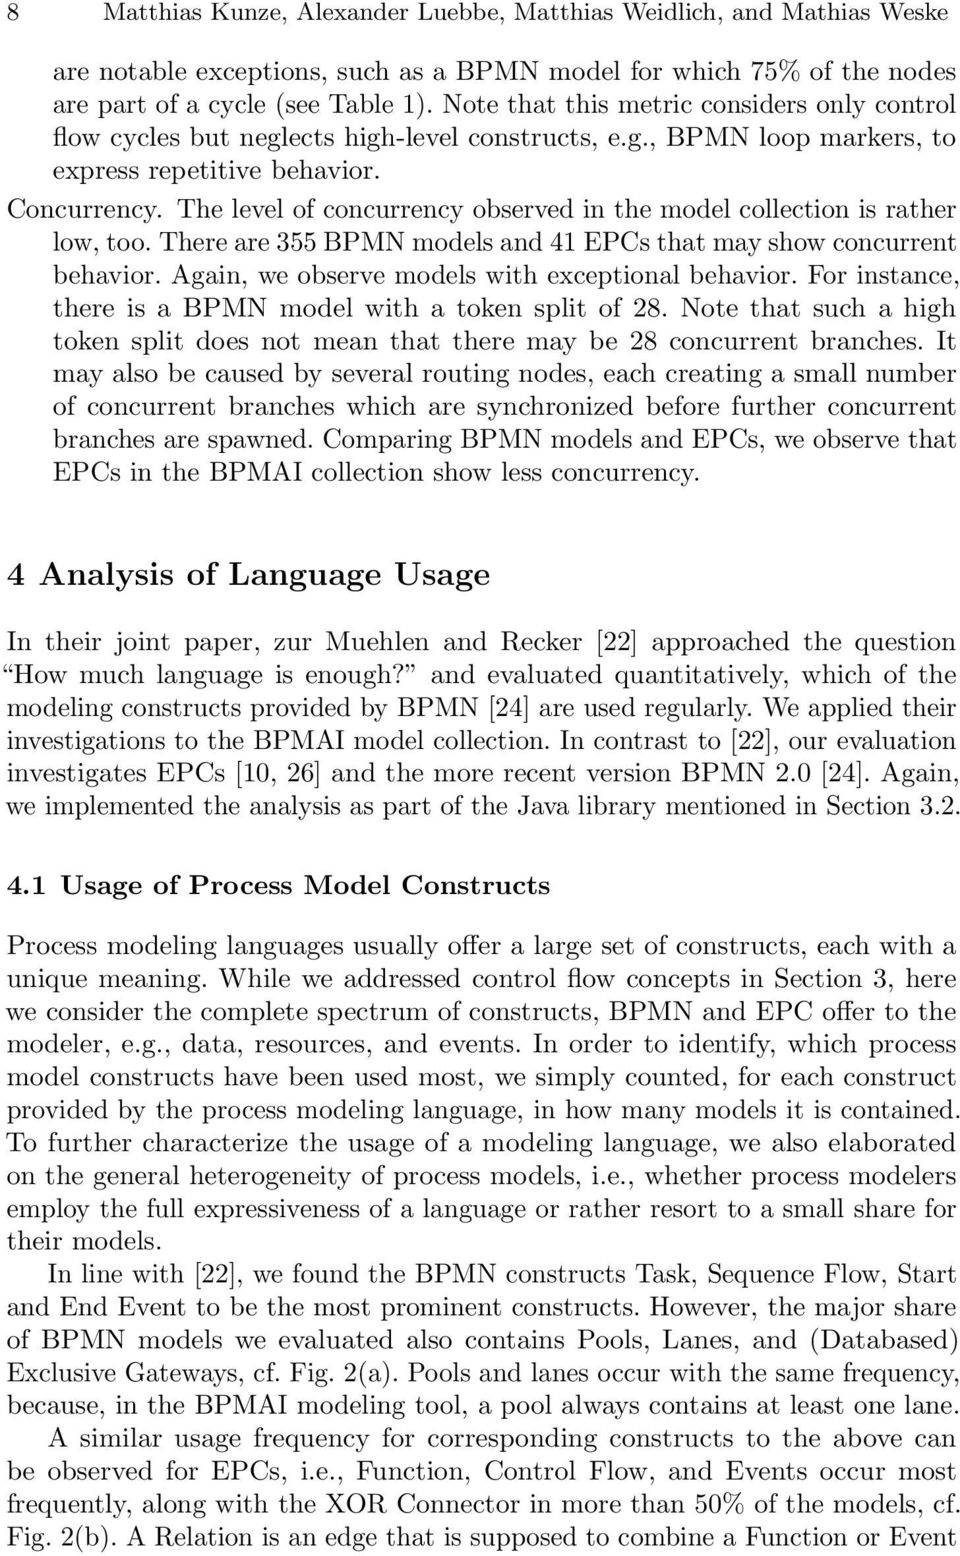 The level of concurrency observed in the model collection is rather low, too. There are 355 BPMN models and 41 EPCs that may show concurrent behavior.